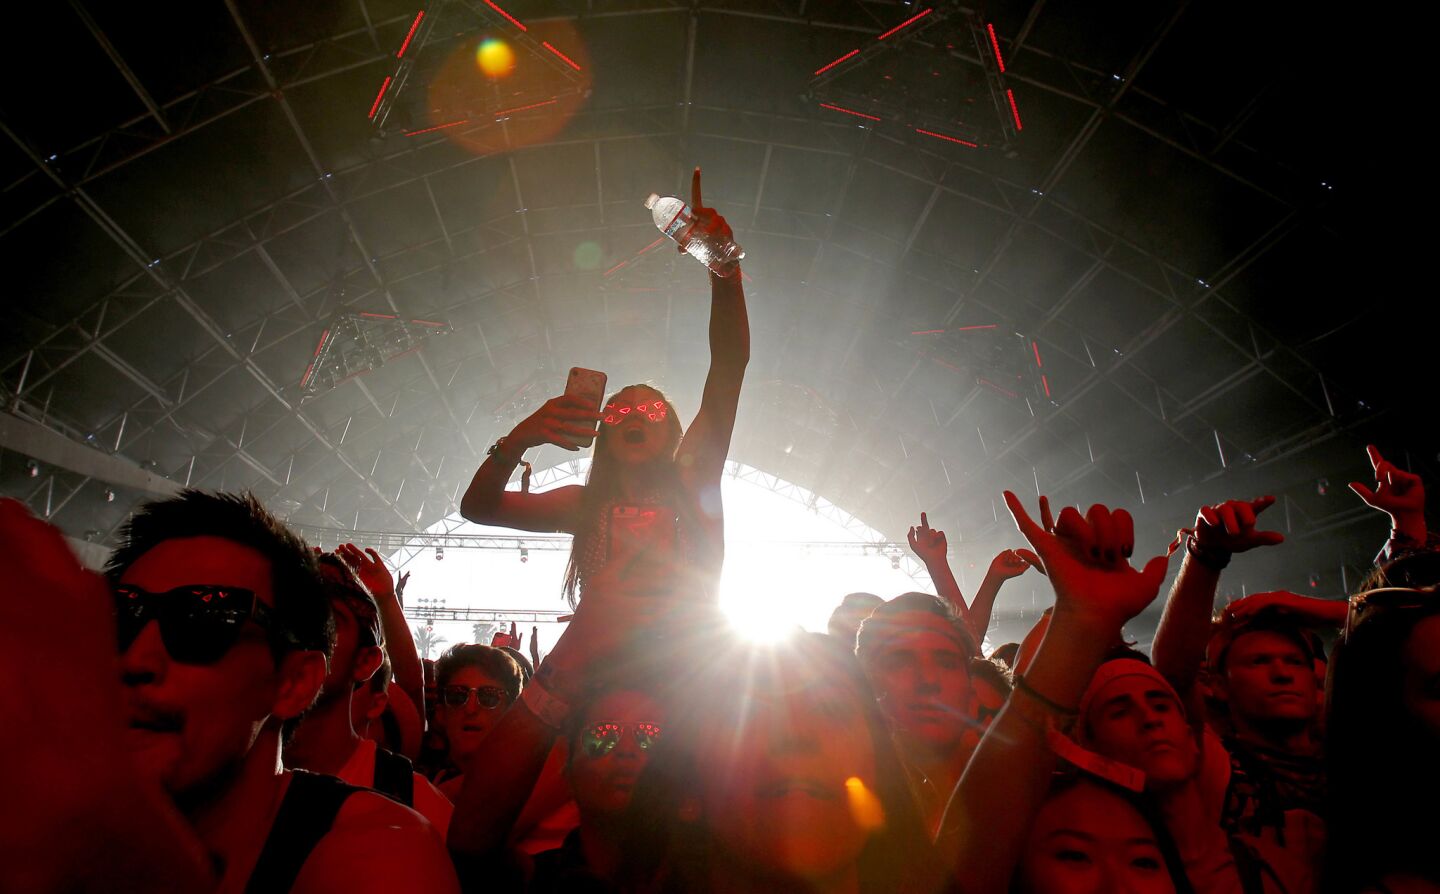 INDIO, CALIF. - APRIL 15, 2017. Fans react to a performance by Canadian hip hop artist Tory Lanez on the Sahara Stage on day two of the Coachella Music and Arts Festival in Indio on Saturday, April 15, 2017. (Luis Sinco/Los Angeles Times)